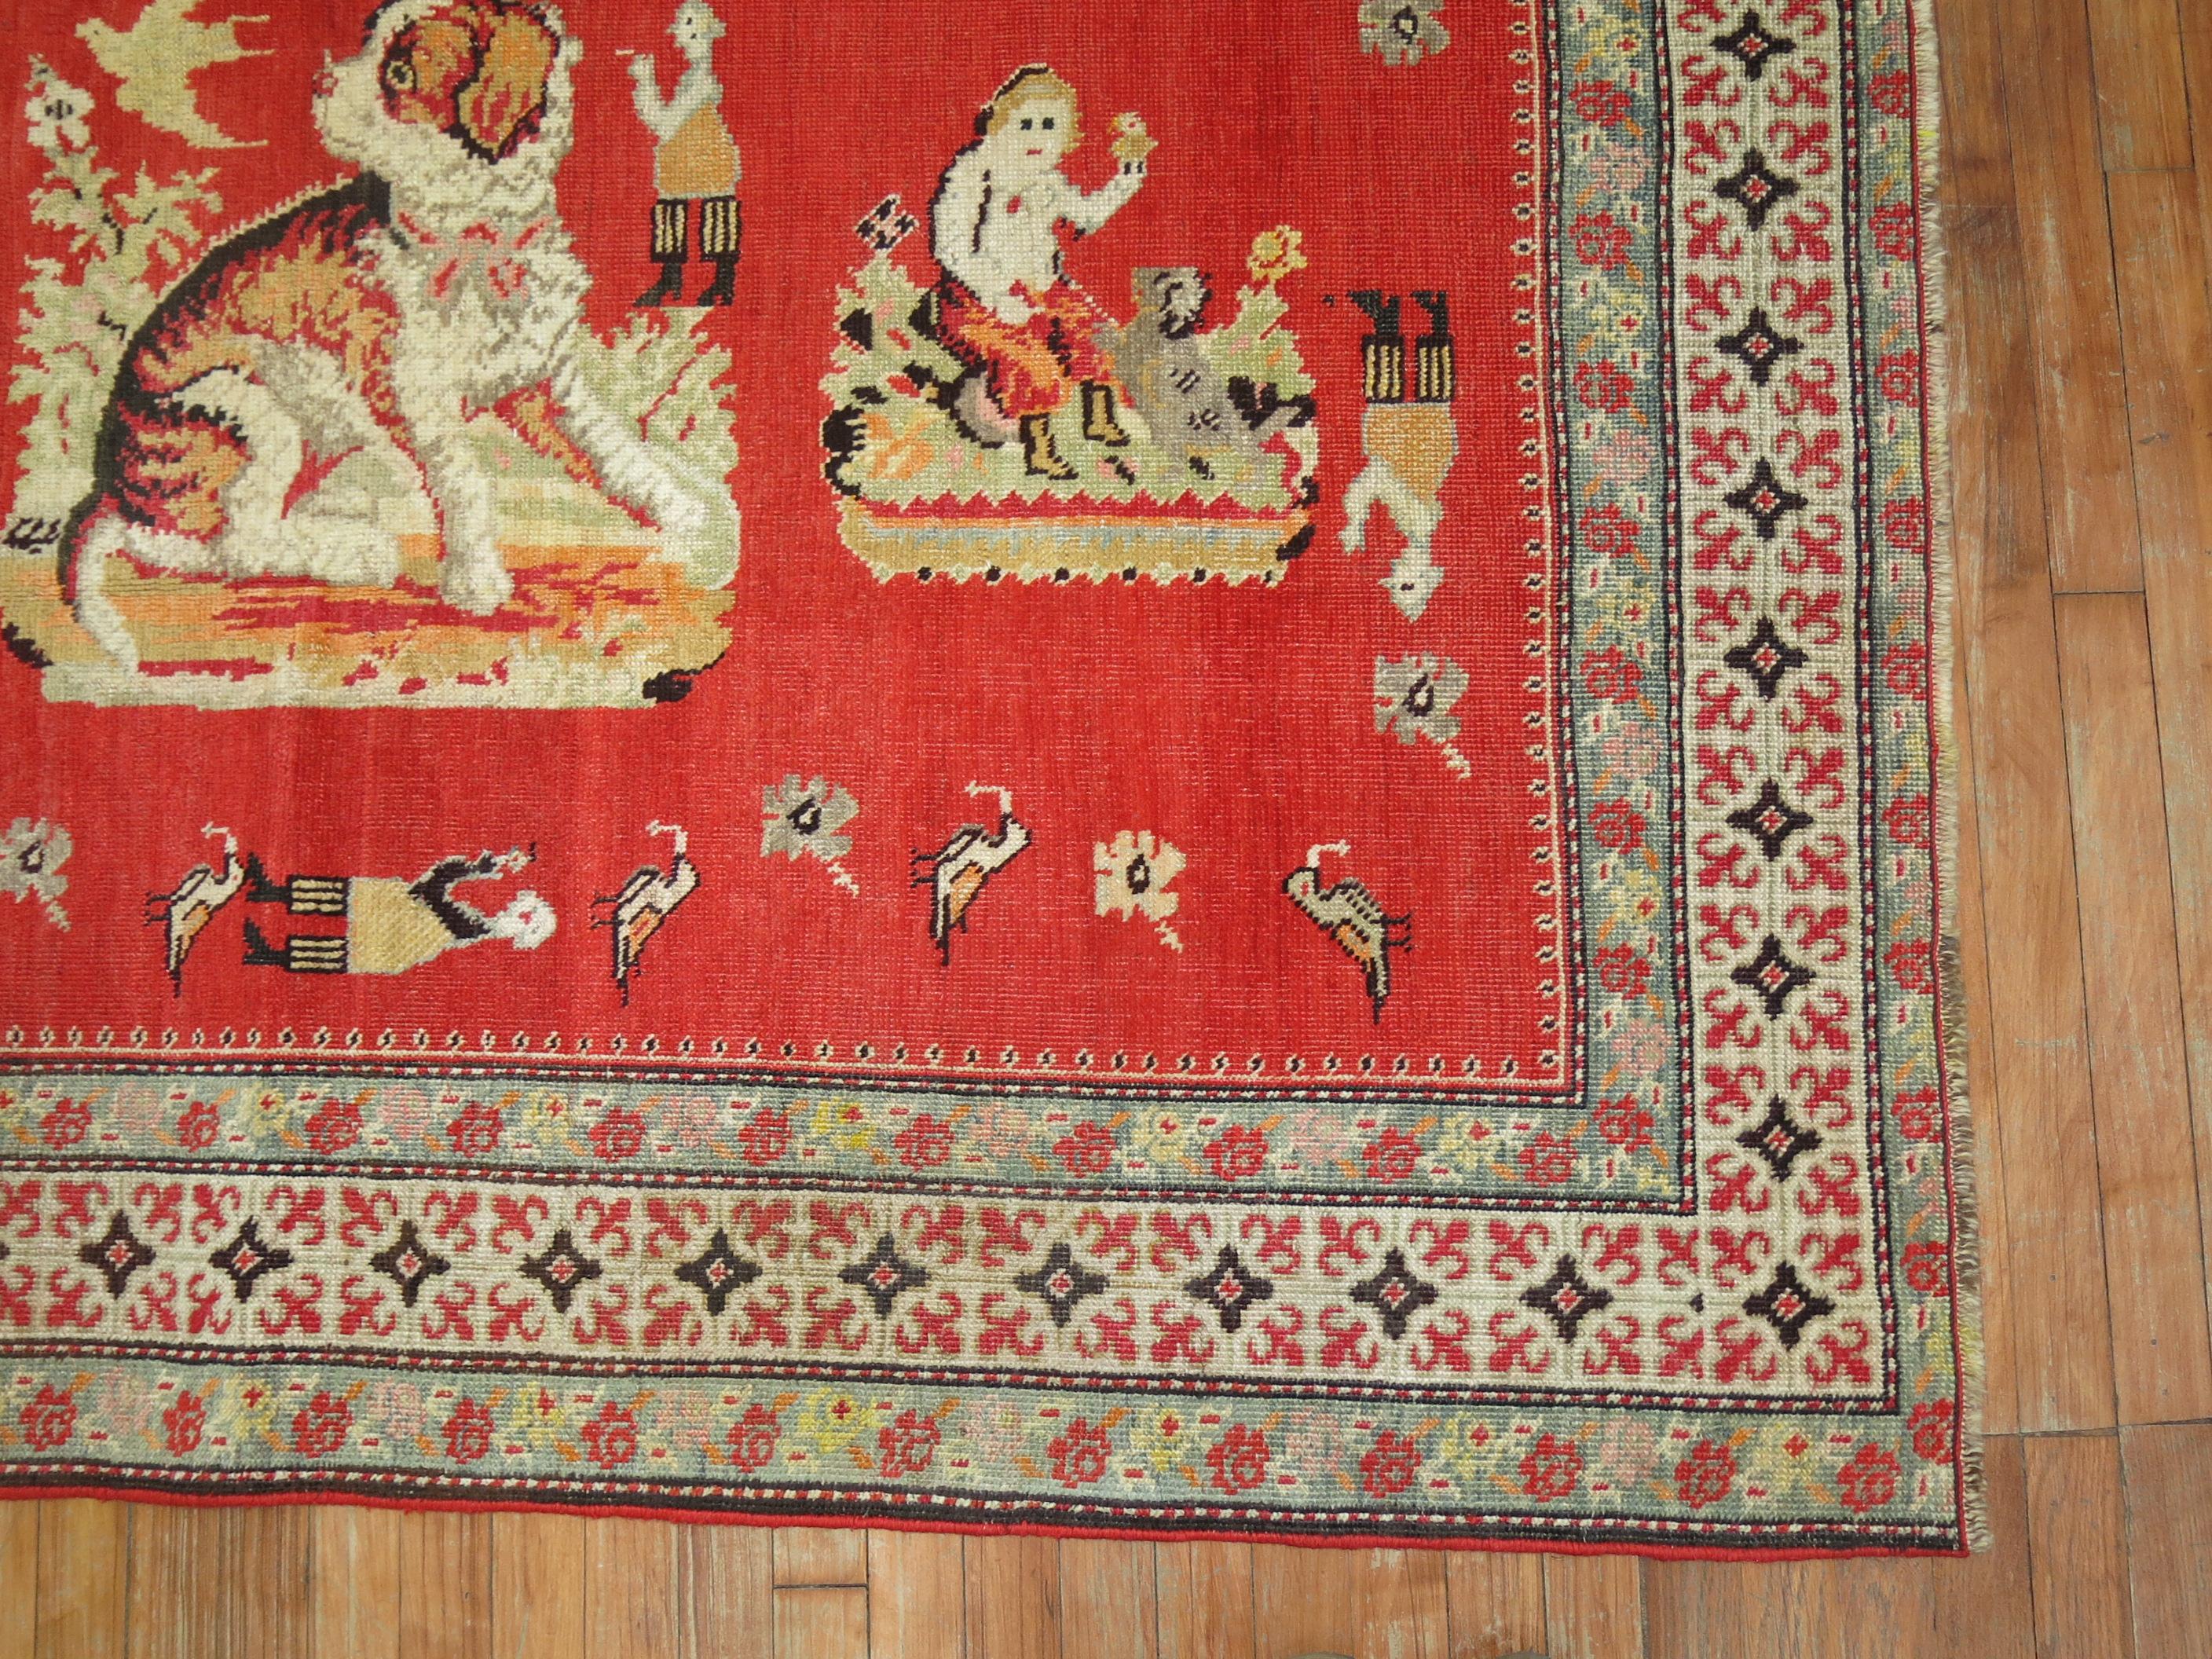 Pictorial Dog Animal Antique Karabagh Rug In Excellent Condition For Sale In New York, NY